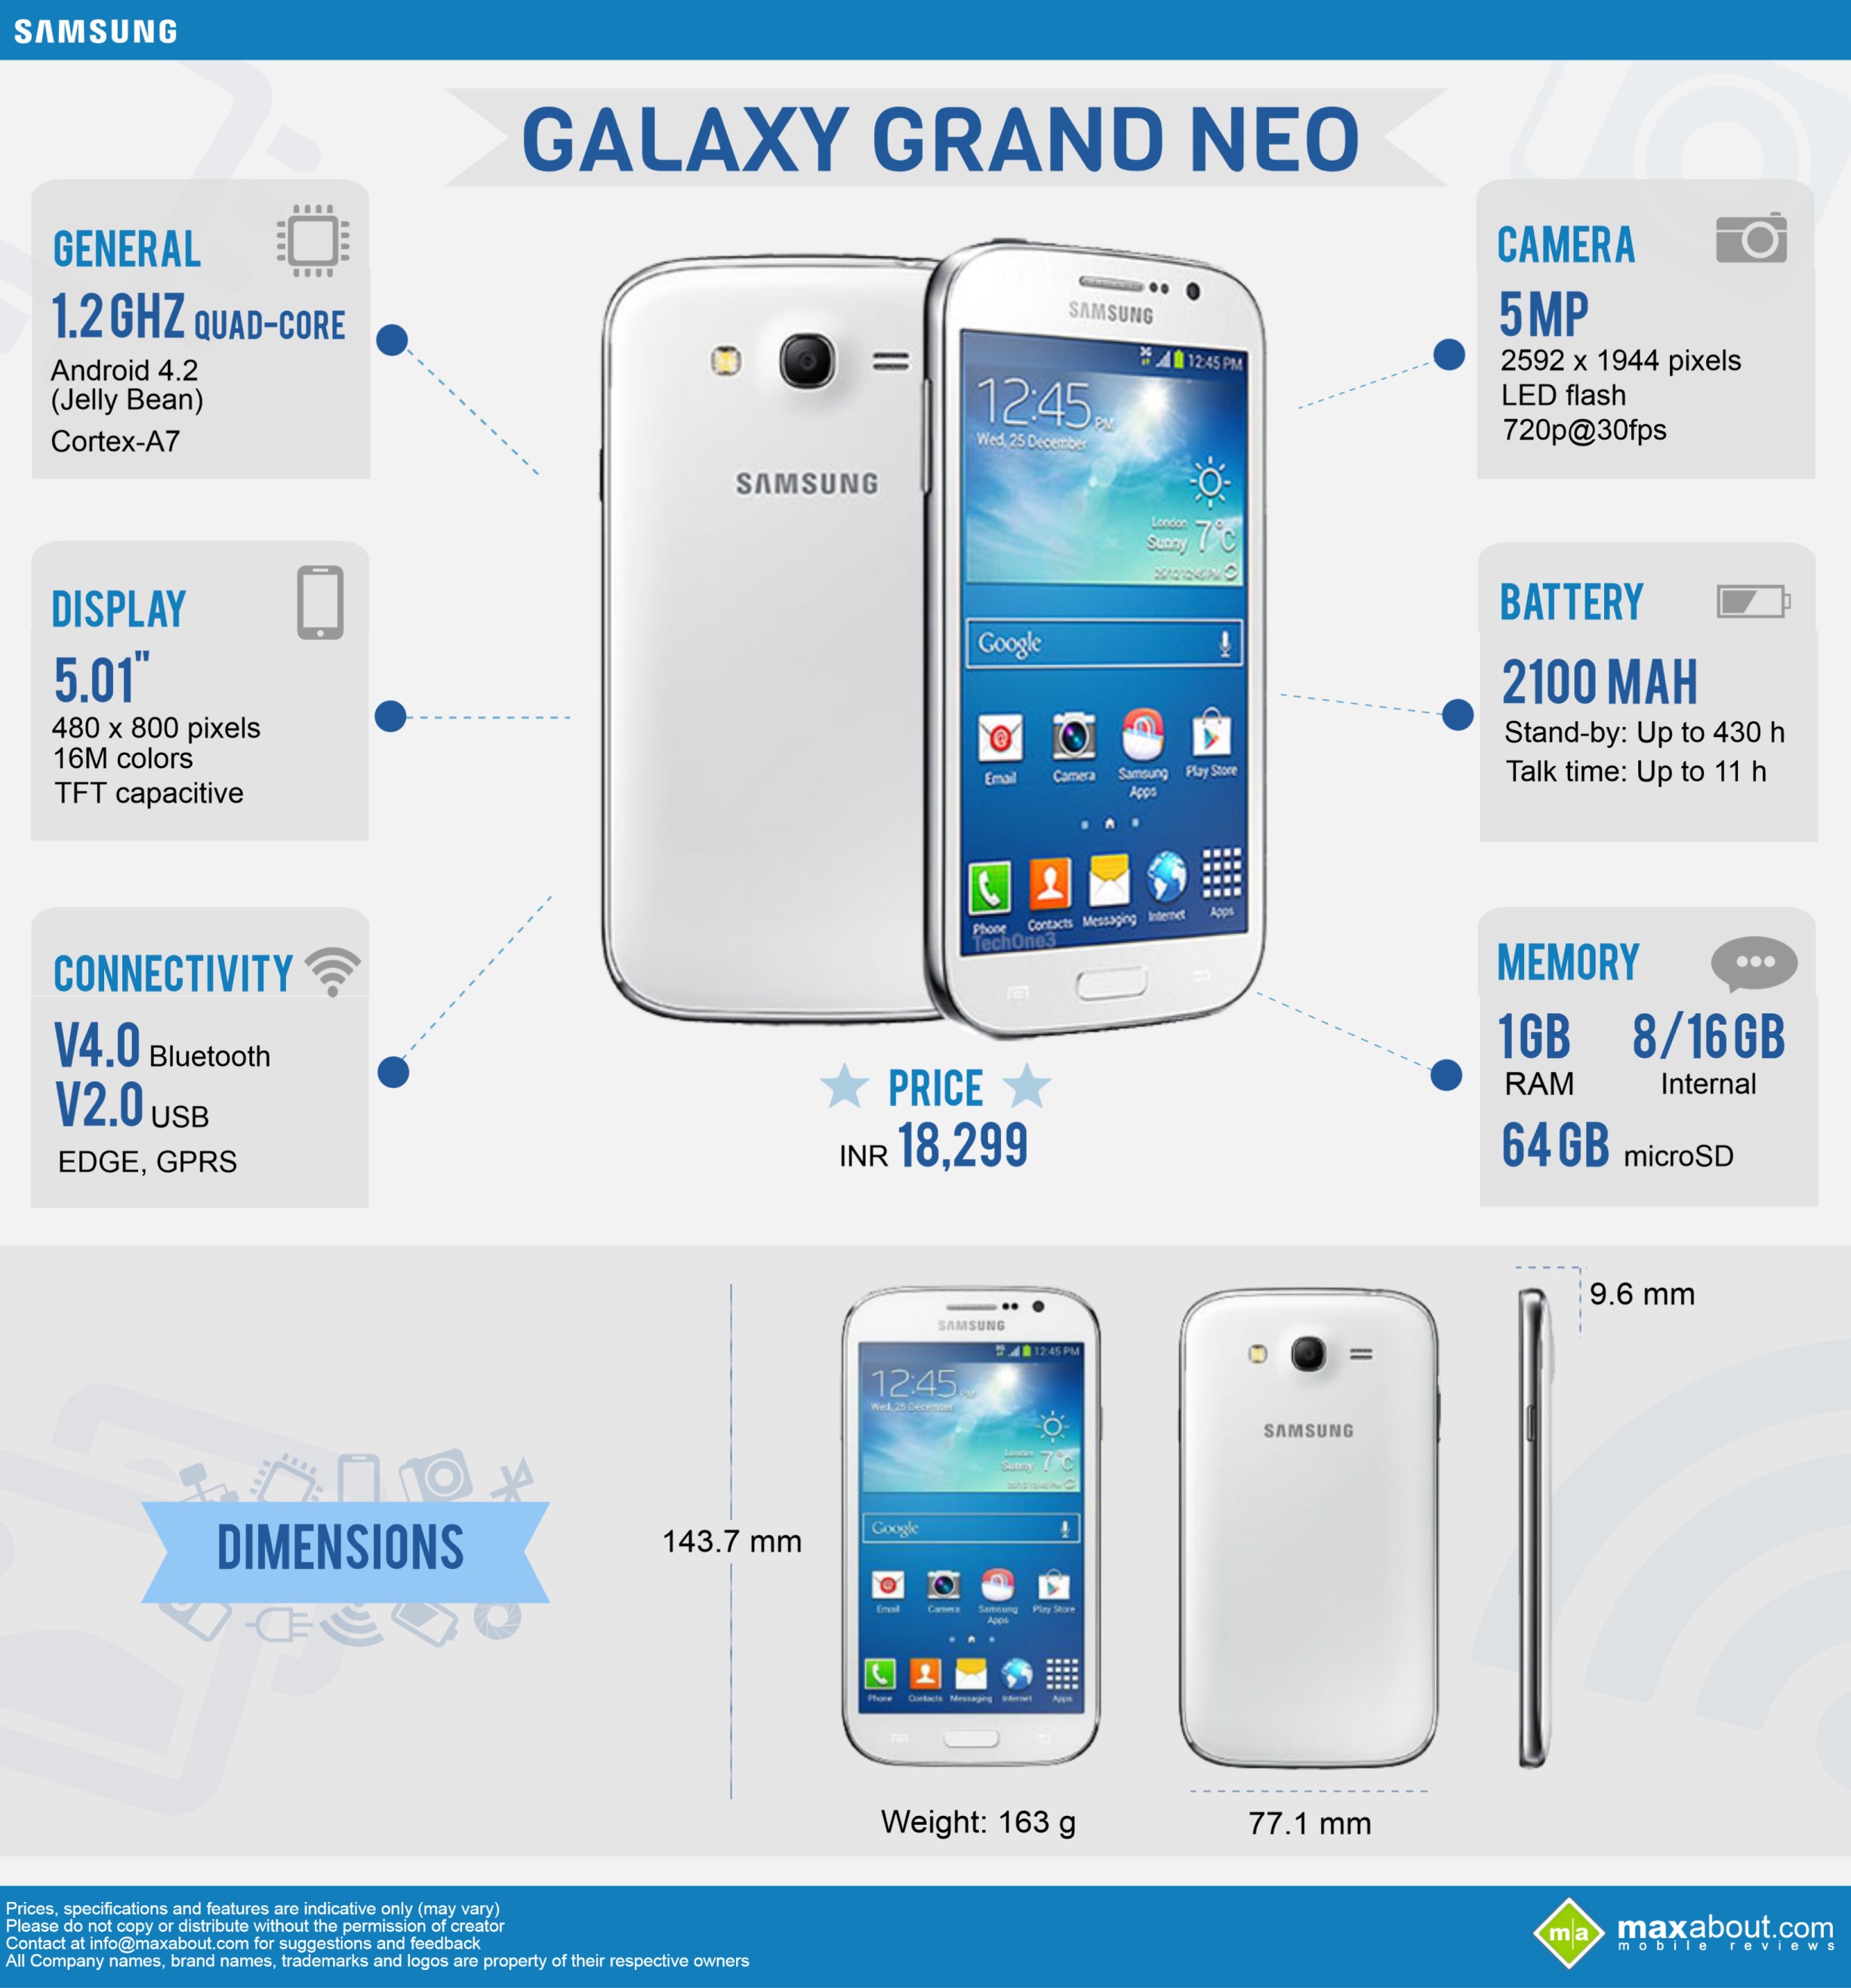 Samsung Galaxy Grand Neo: All You Need to Know